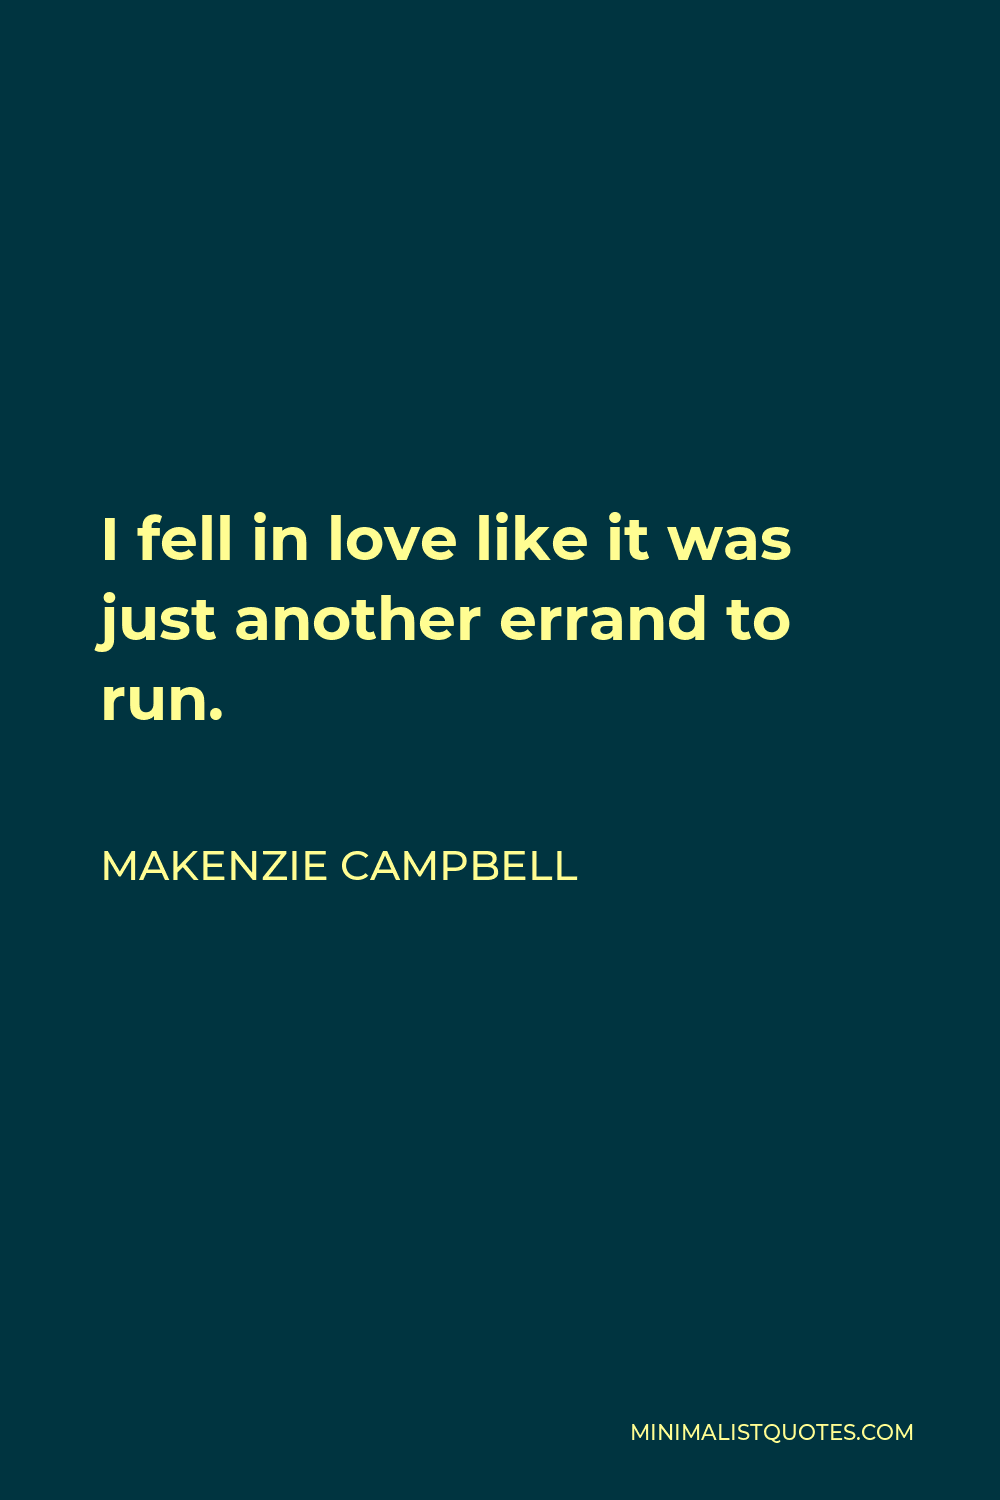 Makenzie Campbell Quote - I fell in love like it was just another errand to run.